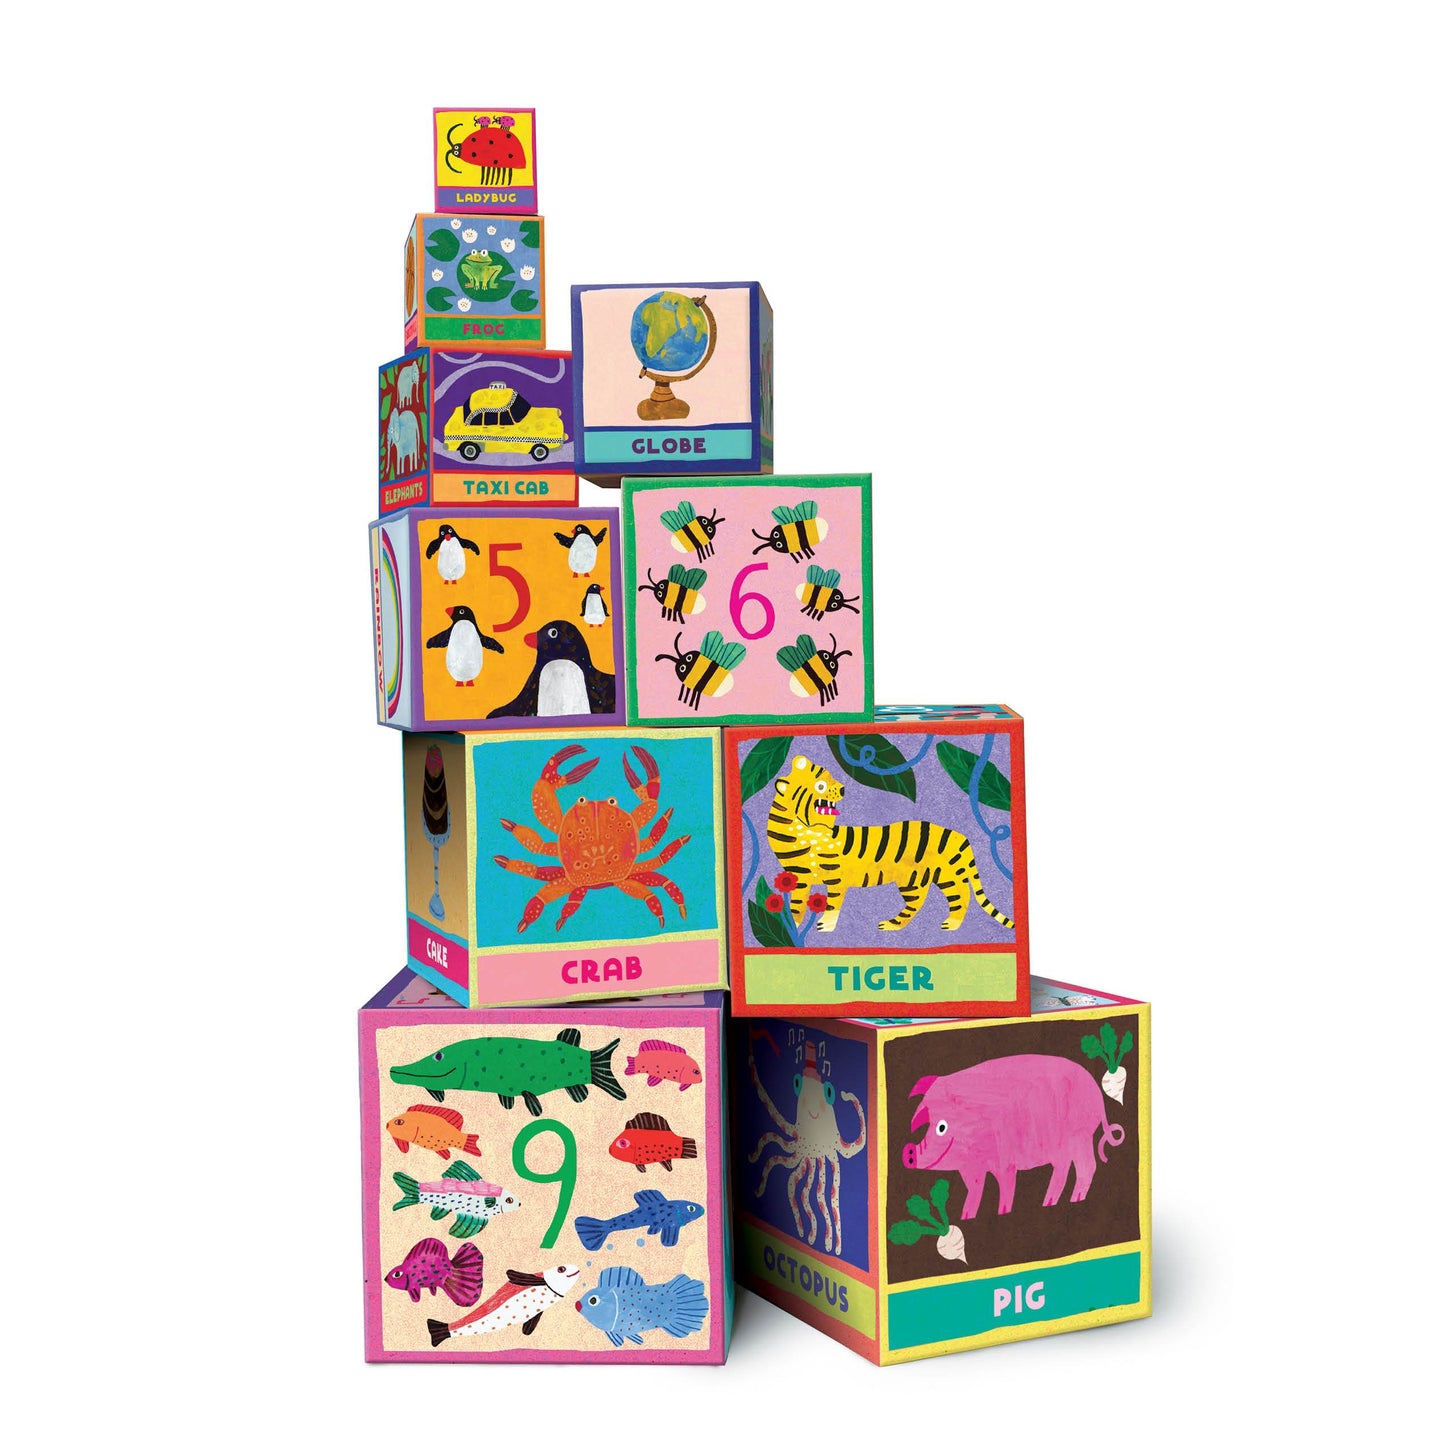 Stacking block tot tower with early reading and illustrations by Monika Forsberg for children two years old and up